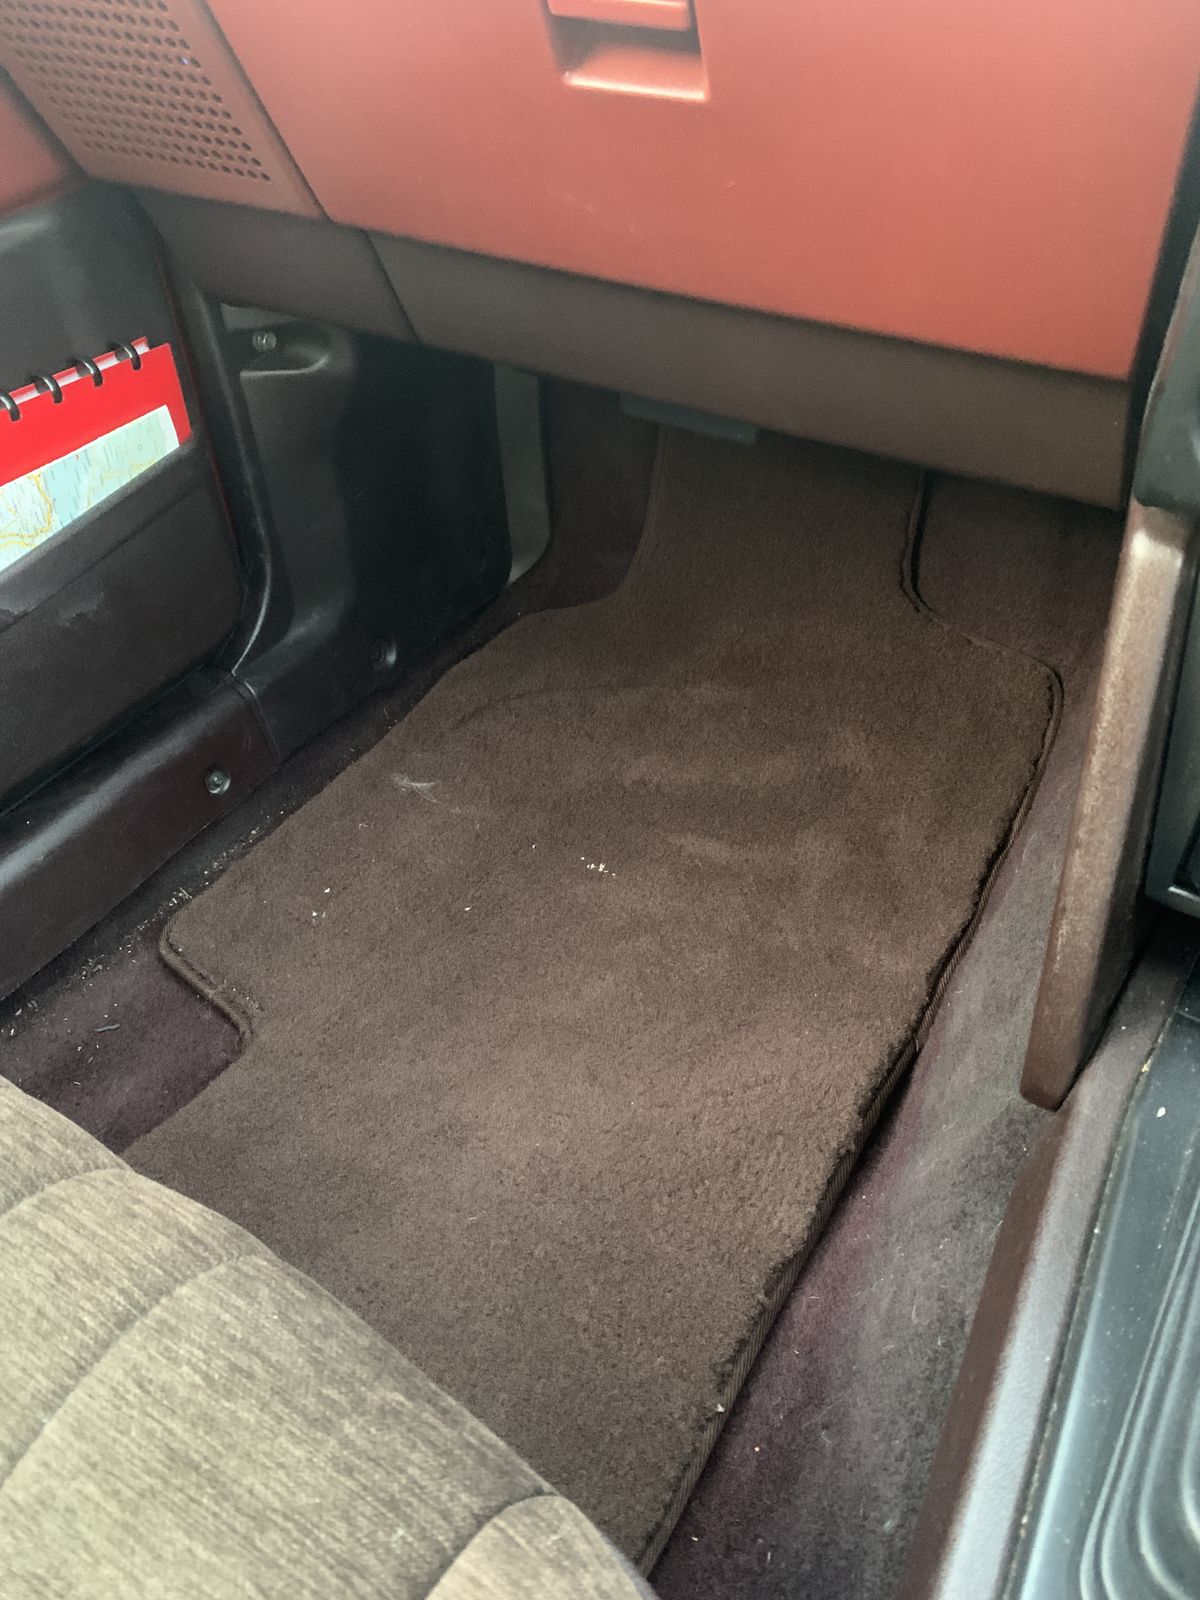 [Image: AEU86 AE86 - Group buy: floor mats at To...ritage.com]